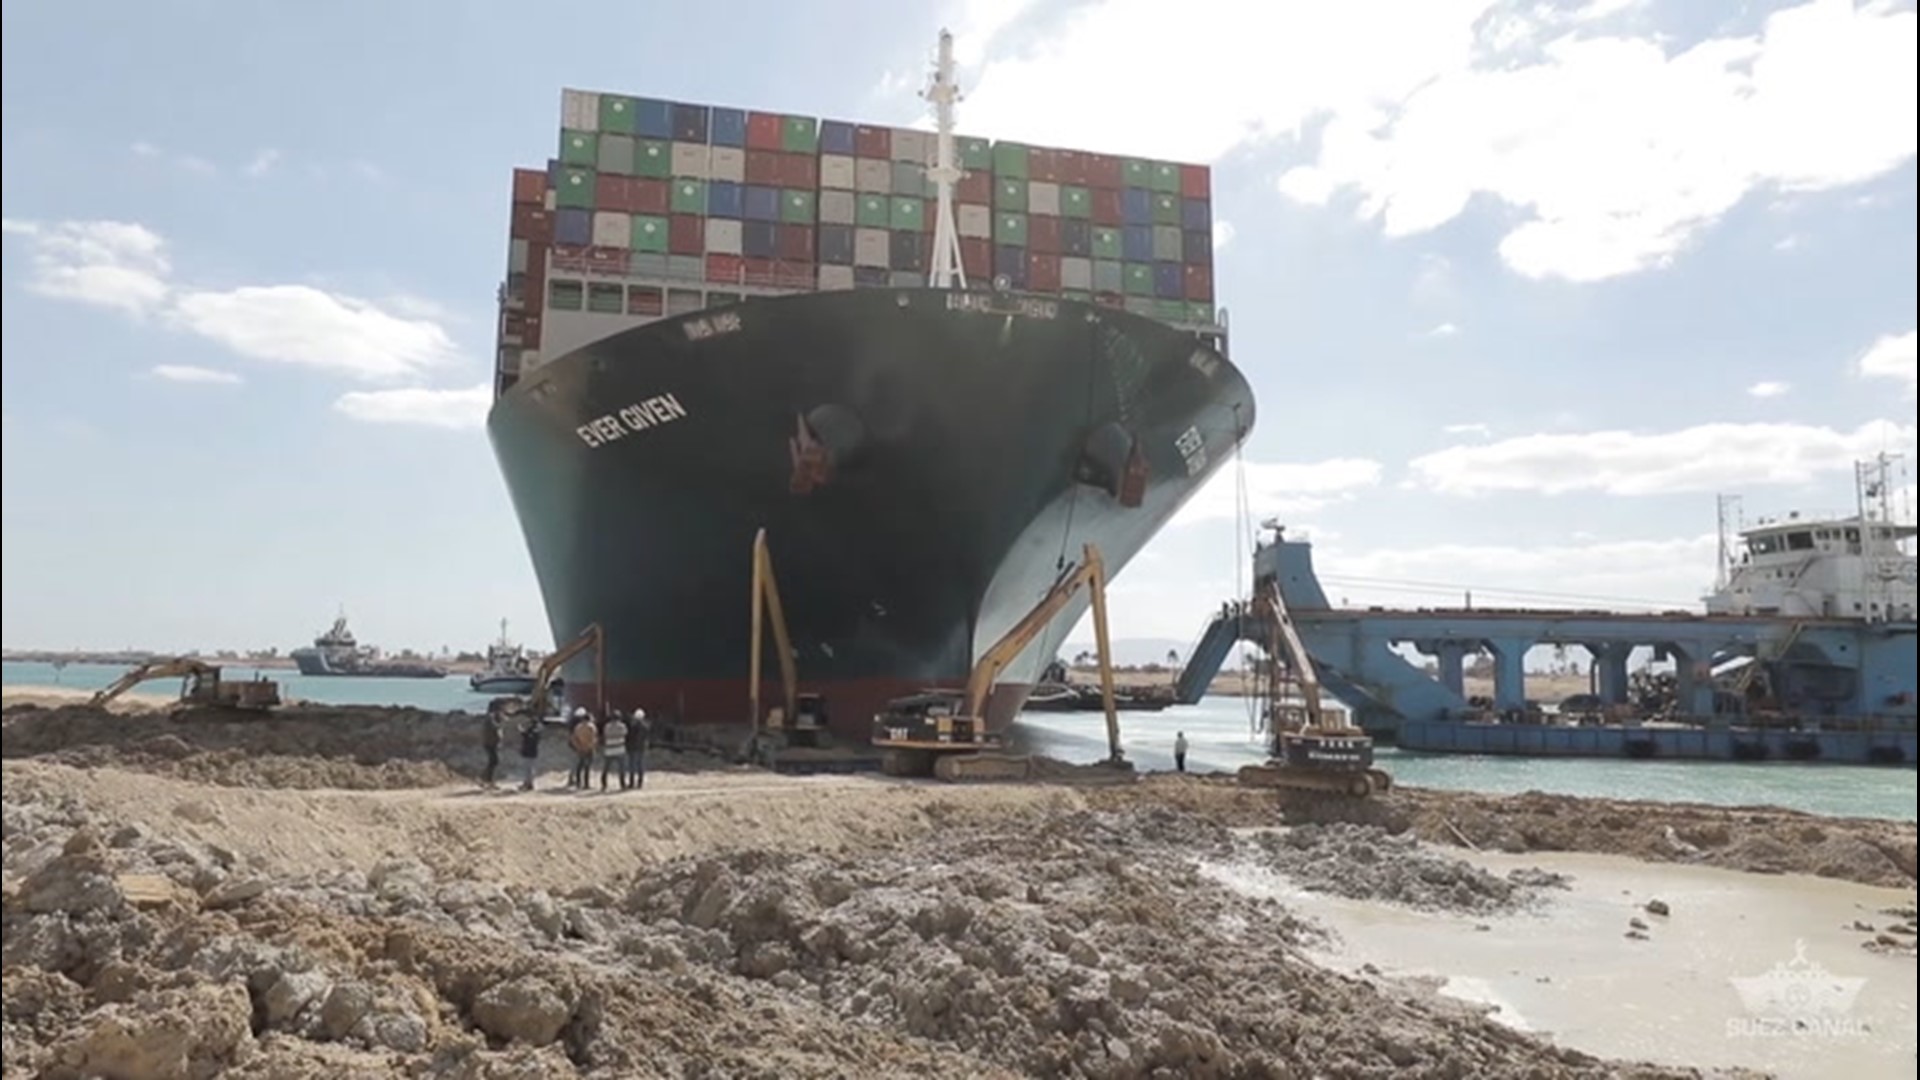 Footage released by the Suez Canal Authority on Sunday showed increased dredging and drilling around the Ever Given, as crews worked to deepen the canal directly around the ship in order to get it floating.